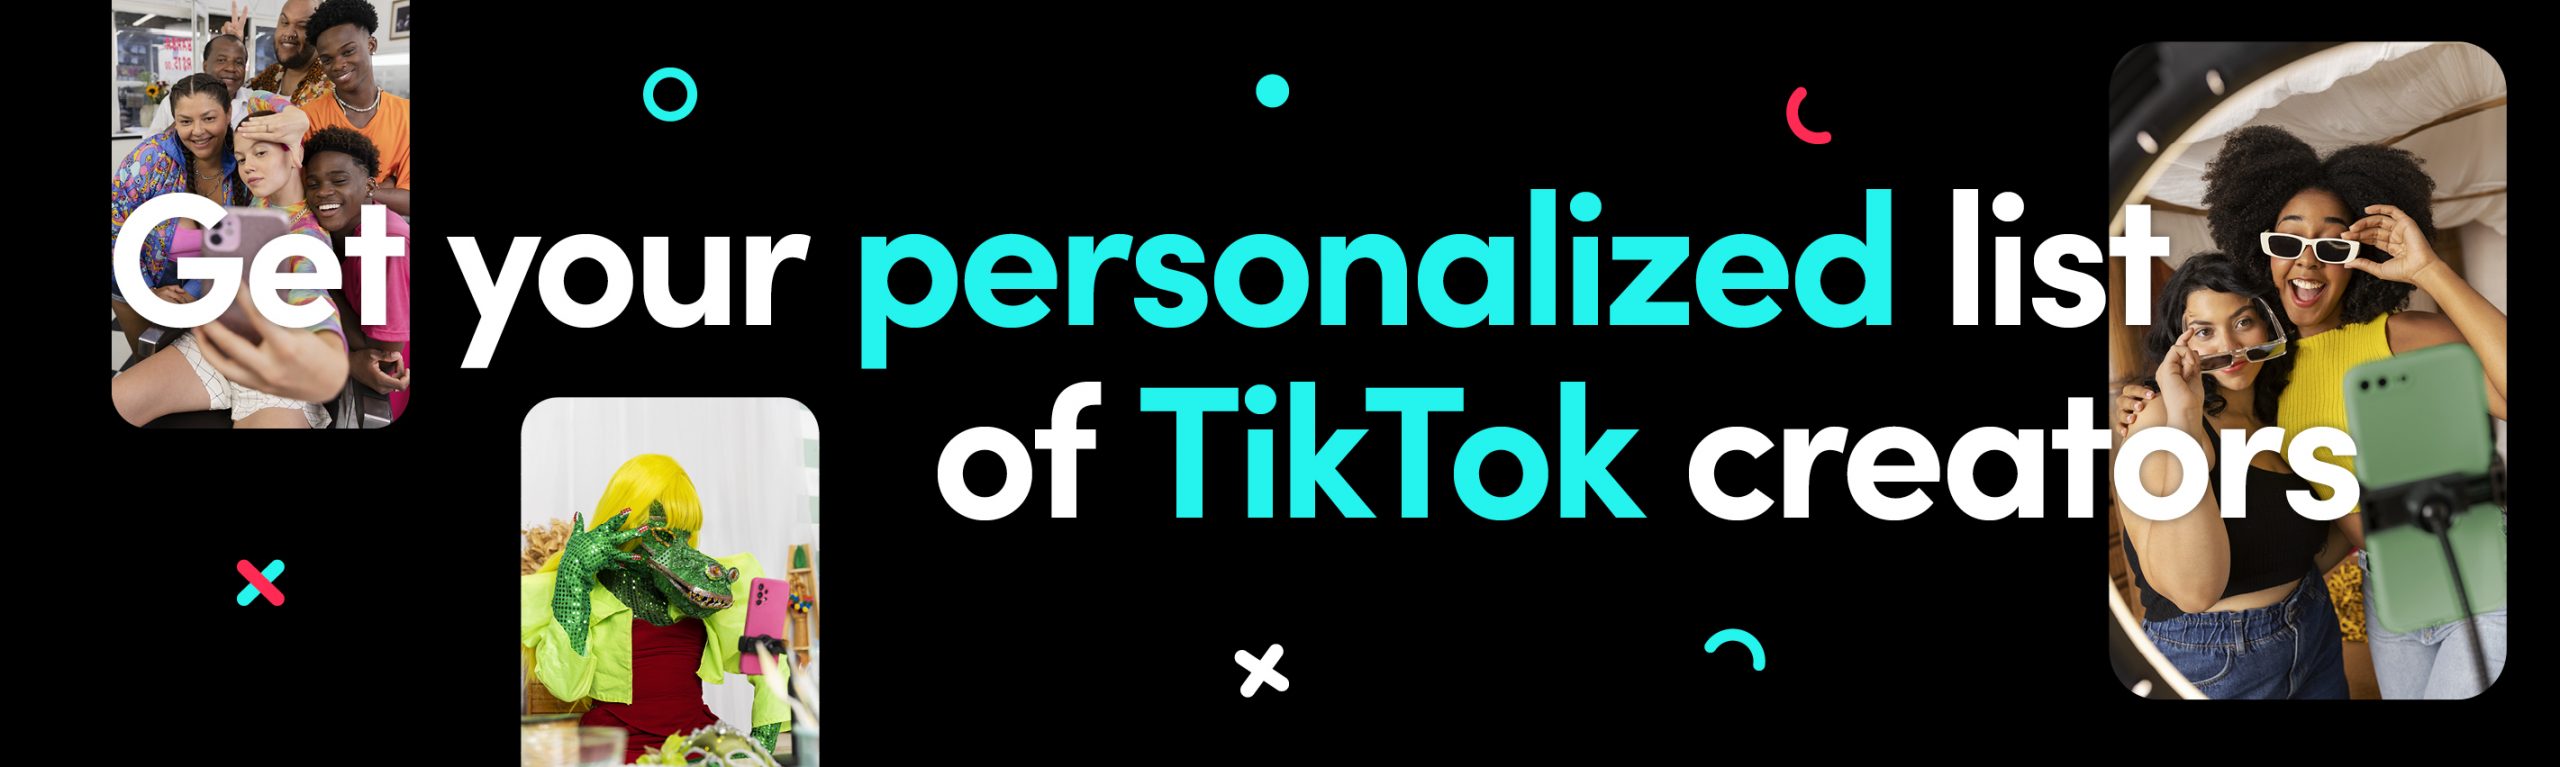 Get a personalized list of TikTok creators to collaborate with